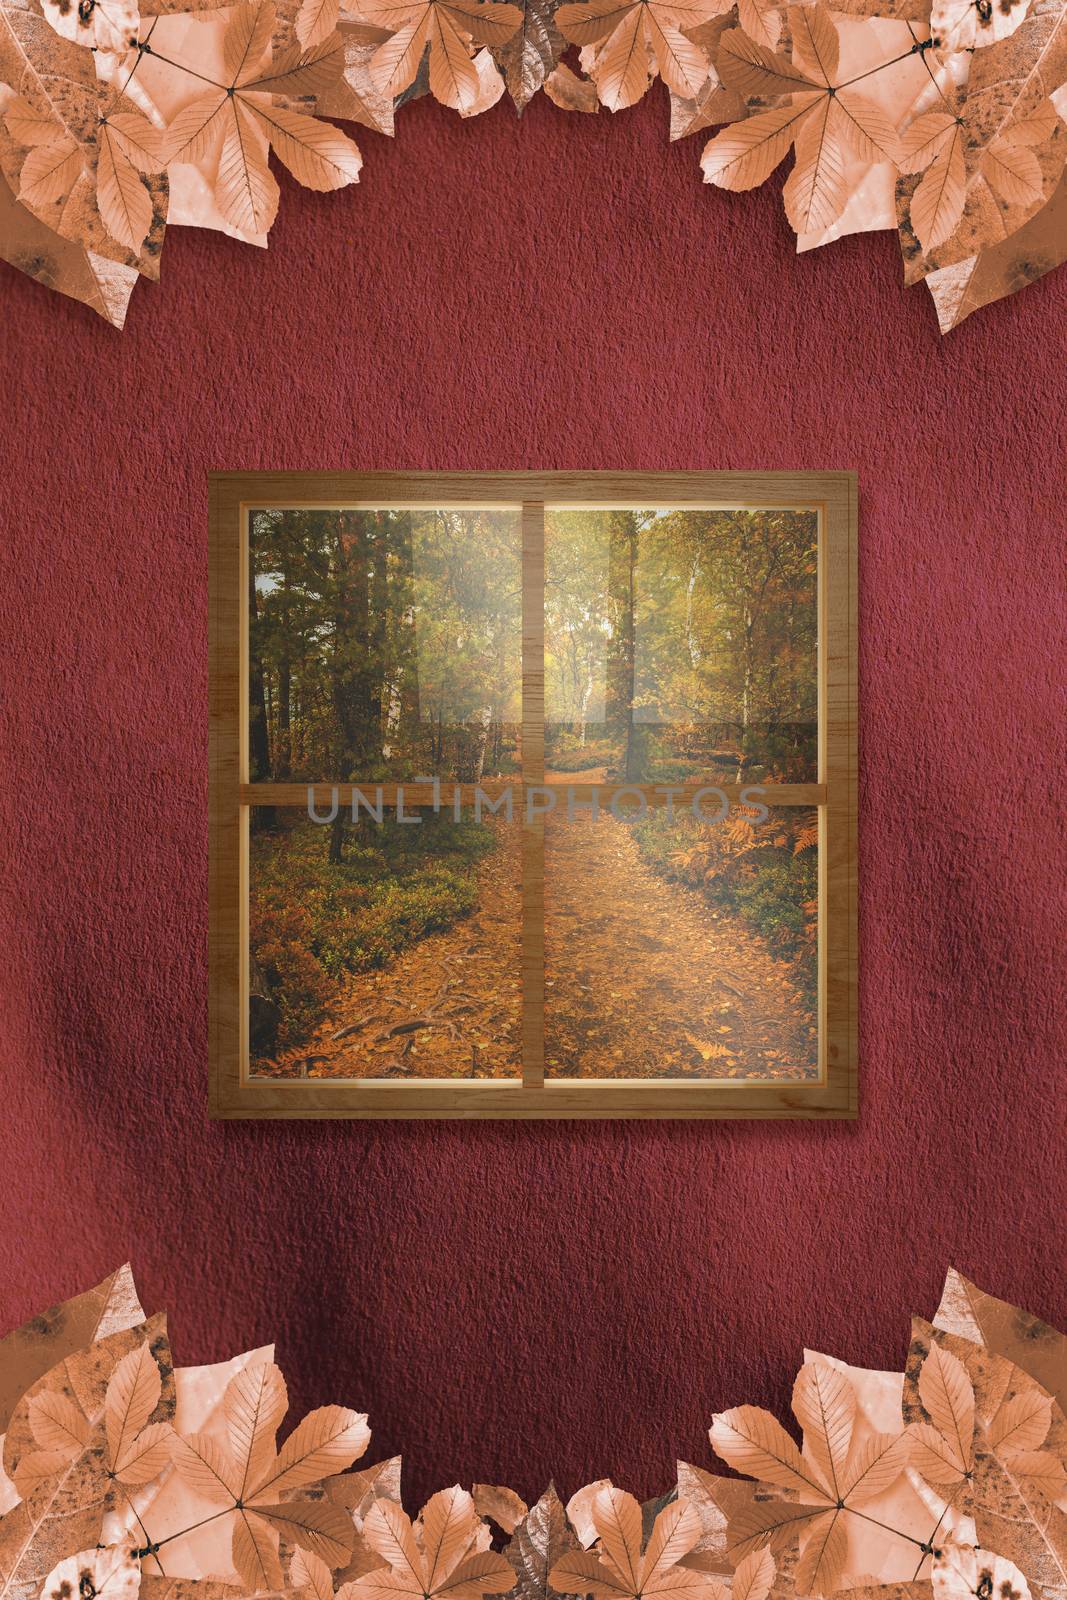 Square shape glass window against autumn leaves pattern